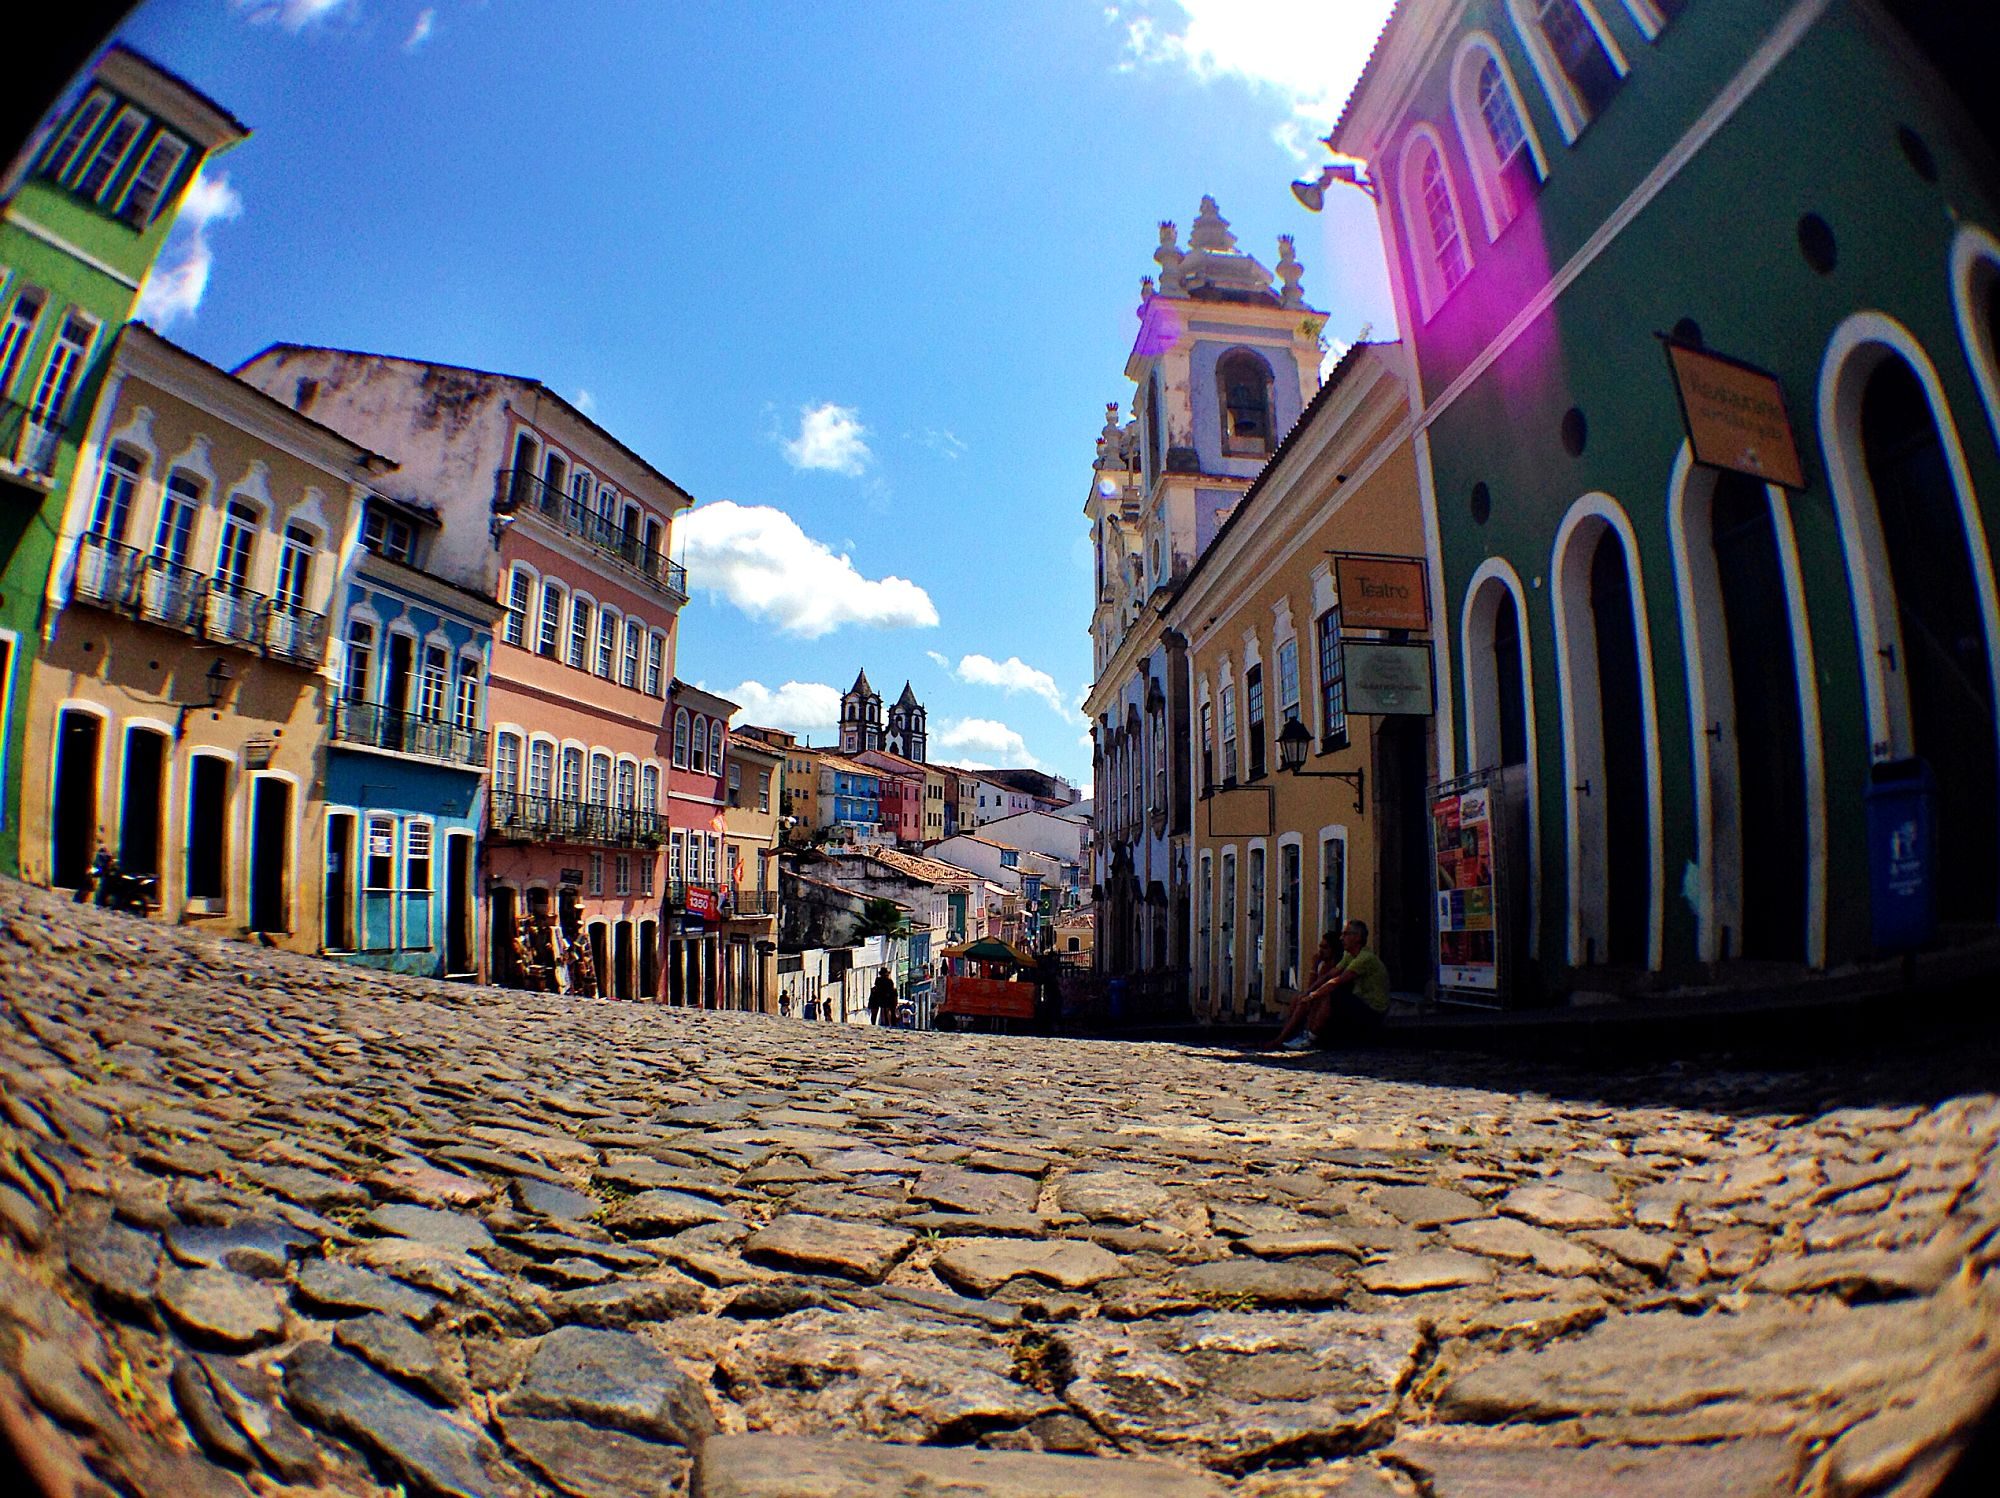 Pelourinho in Salvador, Bahia - From Wikipedia, unknown author